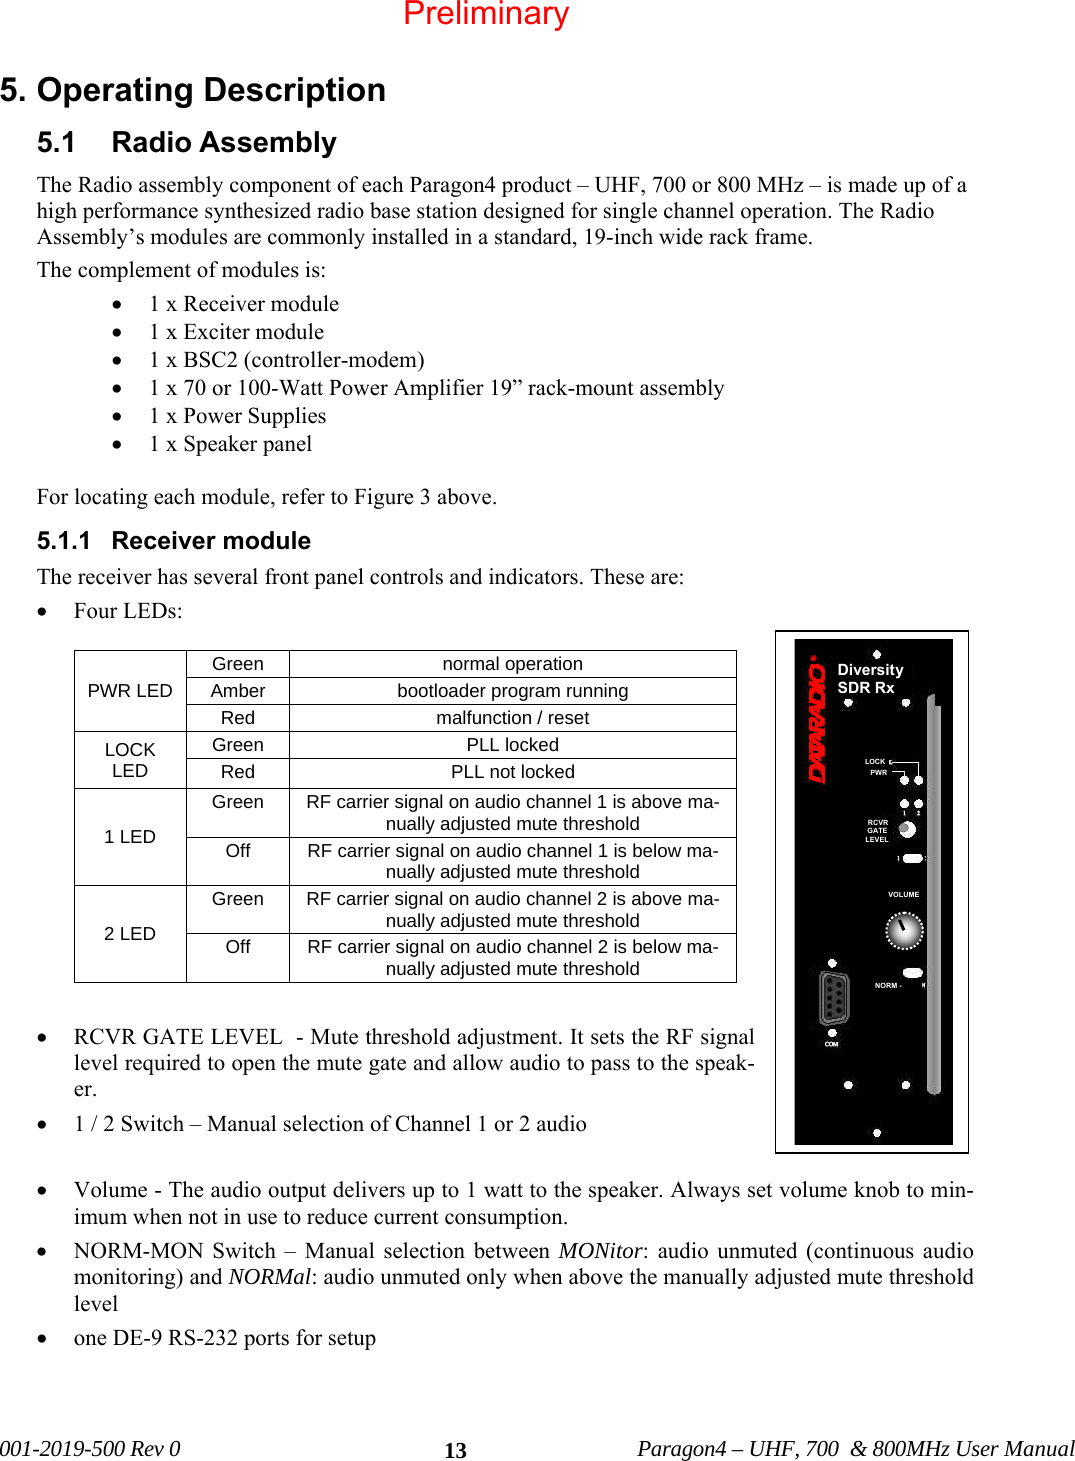   001-2019-500 Rev 0          Paragon4 – UHF, 700  &amp; 800MHz User Manual   13 LOCK  PWR RCVR GATELEVELVOLUME NORM - DiversitySDR Rx 5. Operating Description 5.1 Radio Assembly The Radio assembly component of each Paragon4 product – UHF, 700 or 800 MHz – is made up of a high performance synthesized radio base station designed for single channel operation. The Radio Assembly’s modules are commonly installed in a standard, 19-inch wide rack frame.  The complement of modules is: • 1 x Receiver module • 1 x Exciter module • 1 x BSC2 (controller-modem) • 1 x 70 or 100-Watt Power Amplifier 19” rack-mount assembly  • 1 x Power Supplies • 1 x Speaker panel  For locating each module, refer to Figure 3 above.  5.1.1 Receiver module The receiver has several front panel controls and indicators. These are: • Four LEDs:  PWR LED Green   normal operation Amber   bootloader program running Red   malfunction / reset LOCK LED Green   PLL locked Red        PLL not locked 1 LED Green   RF carrier signal on audio channel 1 is above ma-nually adjusted mute threshold Off   RF carrier signal on audio channel 1 is below ma-nually adjusted mute threshold 2 LED Green   RF carrier signal on audio channel 2 is above ma-nually adjusted mute threshold Off   RF carrier signal on audio channel 2 is below ma-nually adjusted mute threshold  • RCVR GATE LEVEL  - Mute threshold adjustment. It sets the RF signal level required to open the mute gate and allow audio to pass to the speak-er. • 1 / 2 Switch – Manual selection of Channel 1 or 2 audio  • Volume - The audio output delivers up to 1 watt to the speaker. Always set volume knob to min-imum when not in use to reduce current consumption. • NORM-MON Switch – Manual selection between MONitor: audio unmuted (continuous audio monitoring) and NORMal: audio unmuted only when above the manually adjusted mute threshold level • one DE-9 RS-232 ports for setup  Preliminary